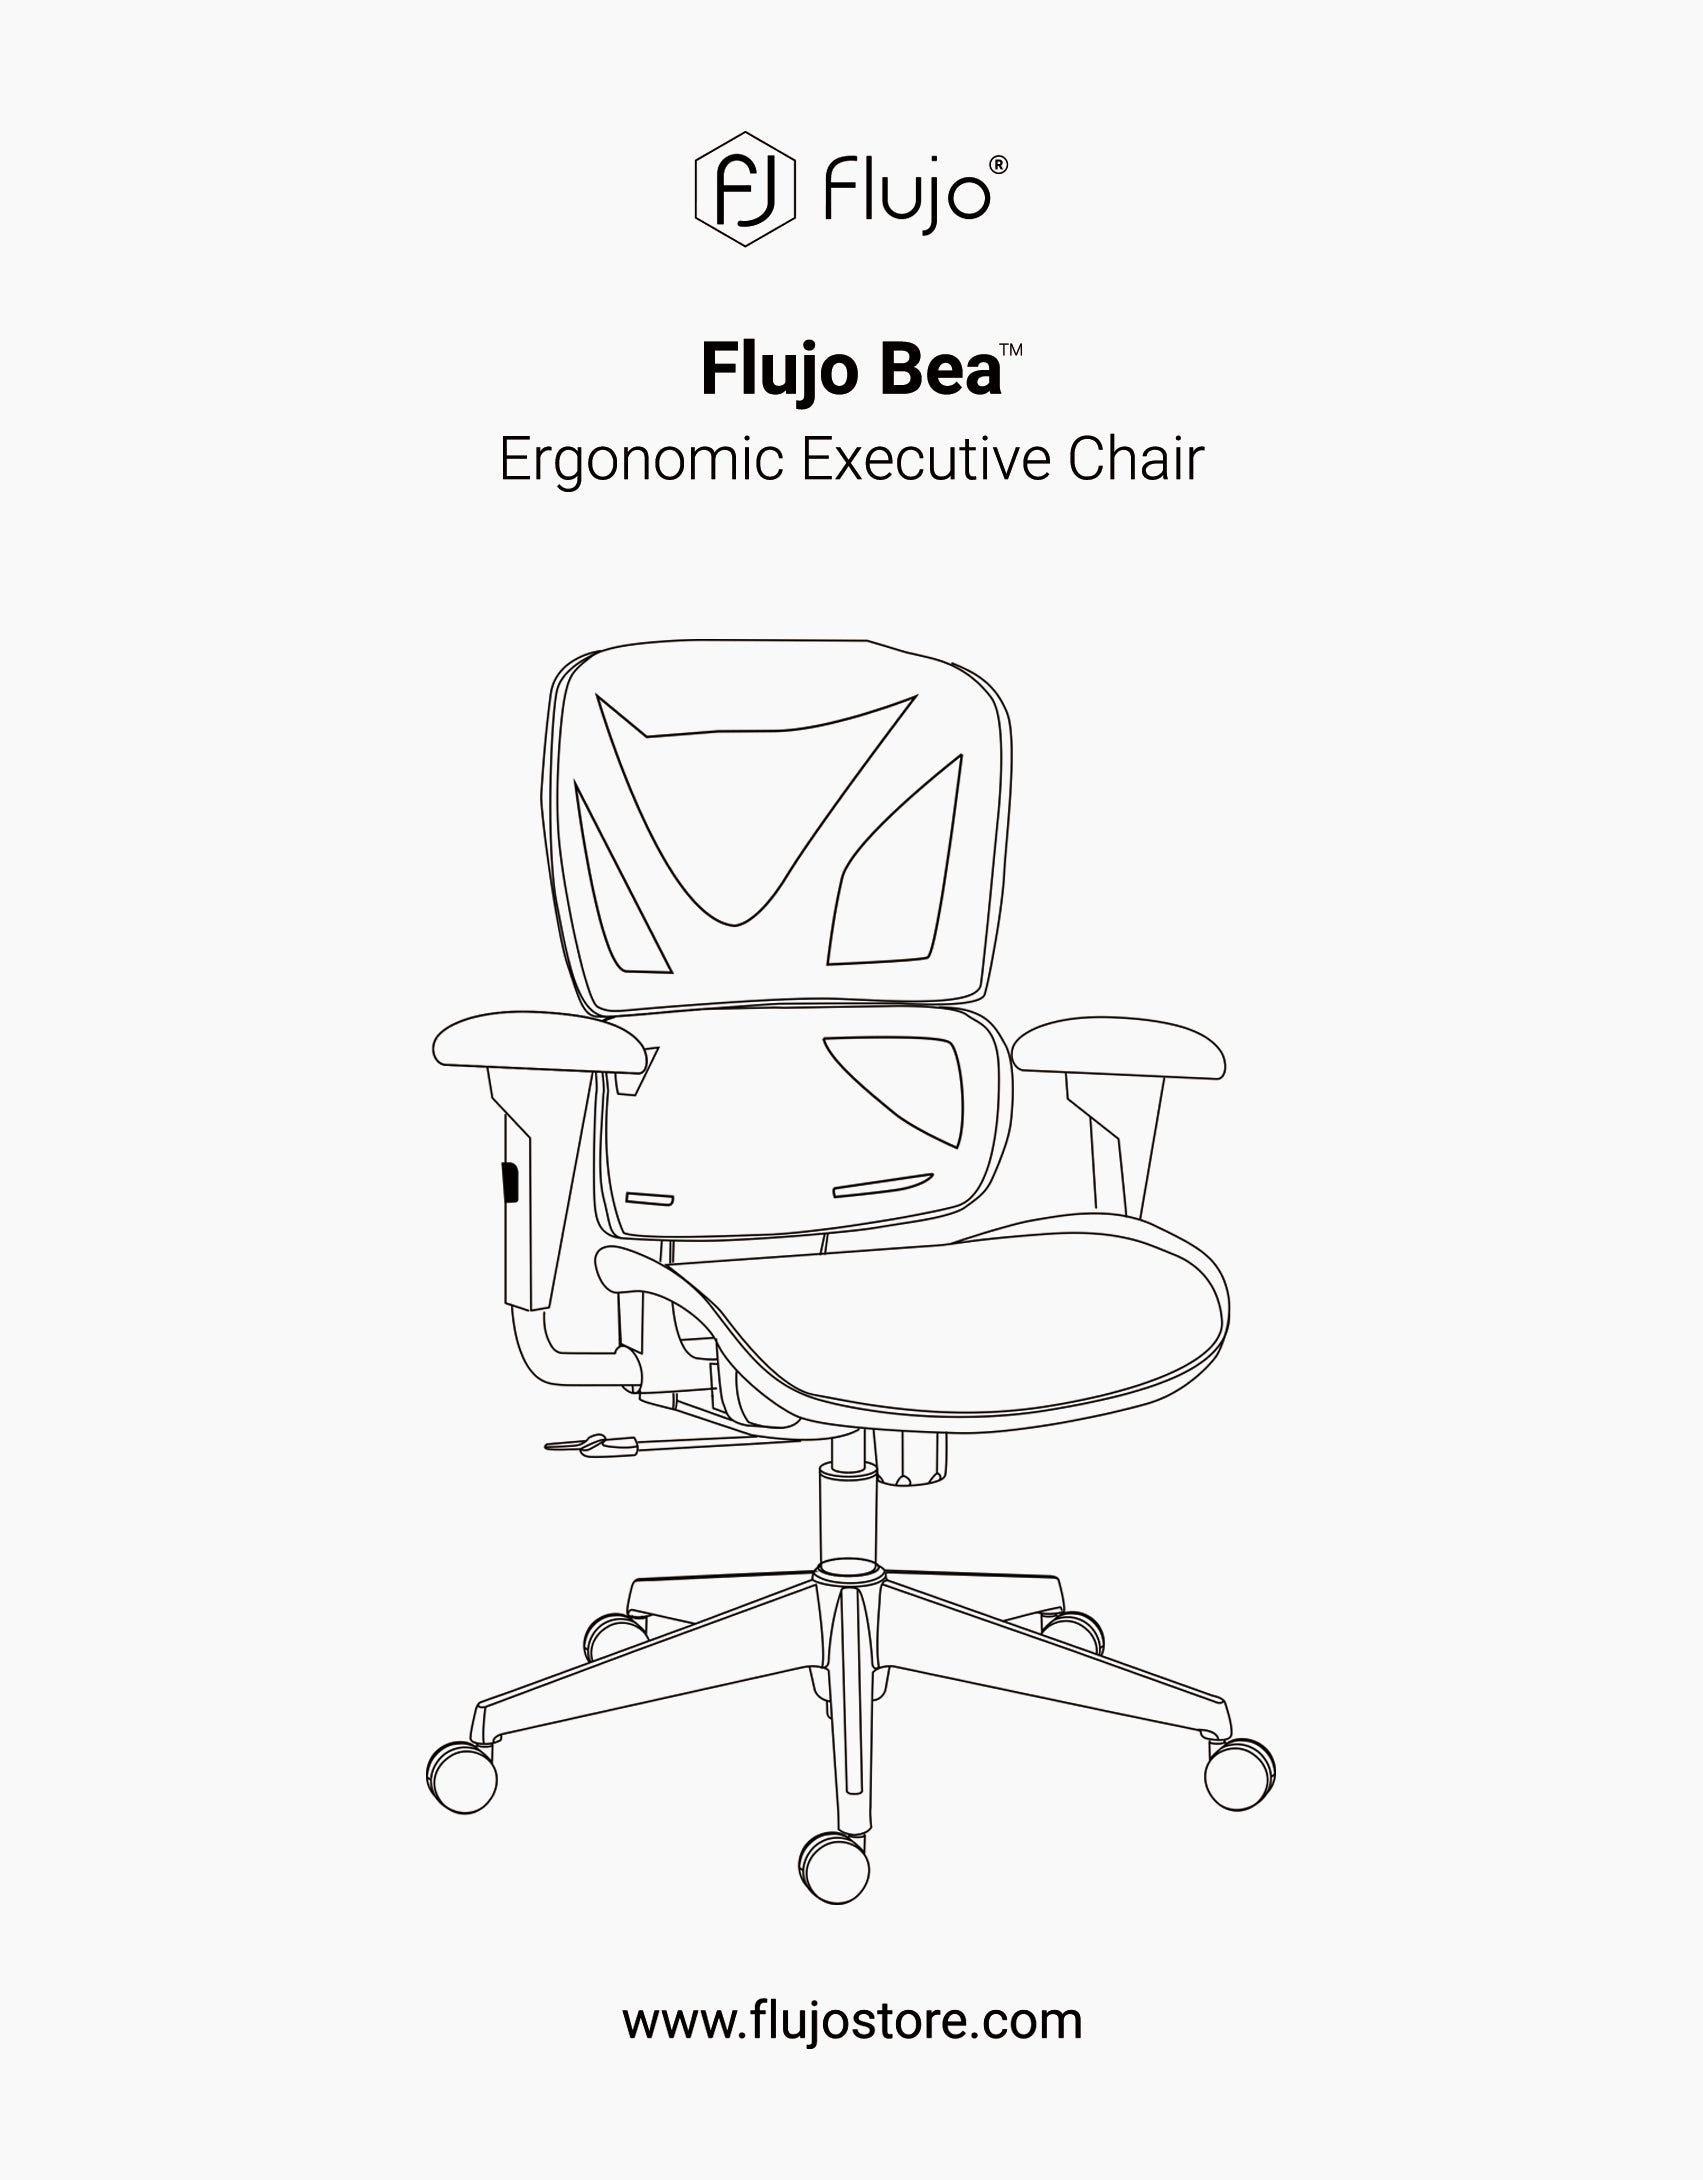 Illustration of the Flujo Bea™ Ergonomic Executive Chair with contoured seat and backrest, highlighting its supportive structure, as advertised on Flujo's website.